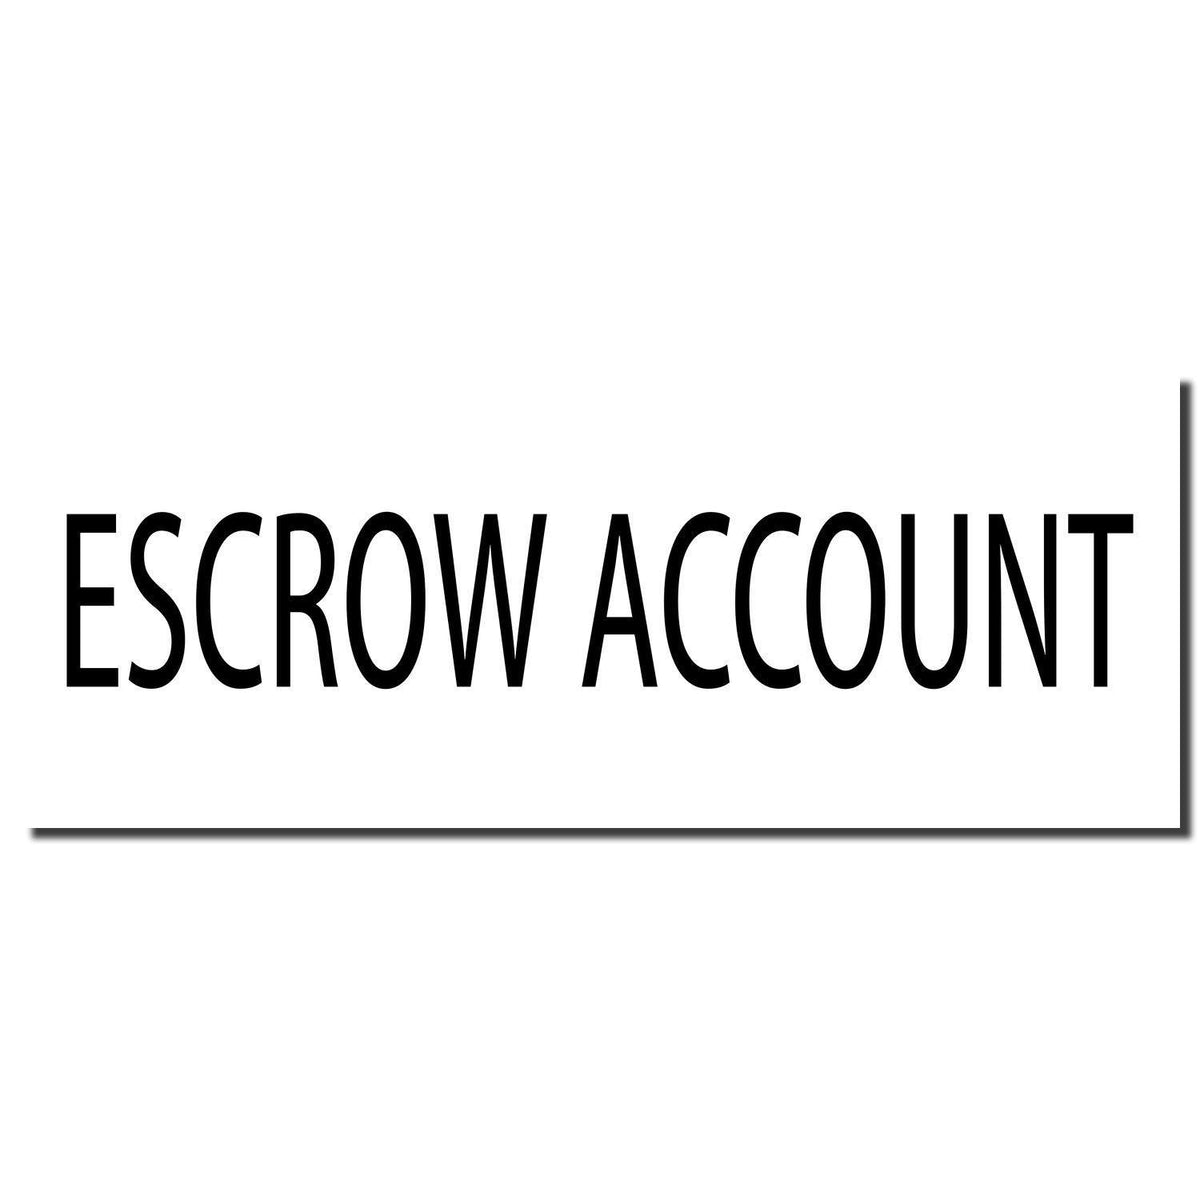 Self Inking Escrow Account Stamp - Engineer Seal Stamps - Brand_Trodat, Impression Size_Small, Stamp Type_Self-Inking Stamp, Type of Use_Finance